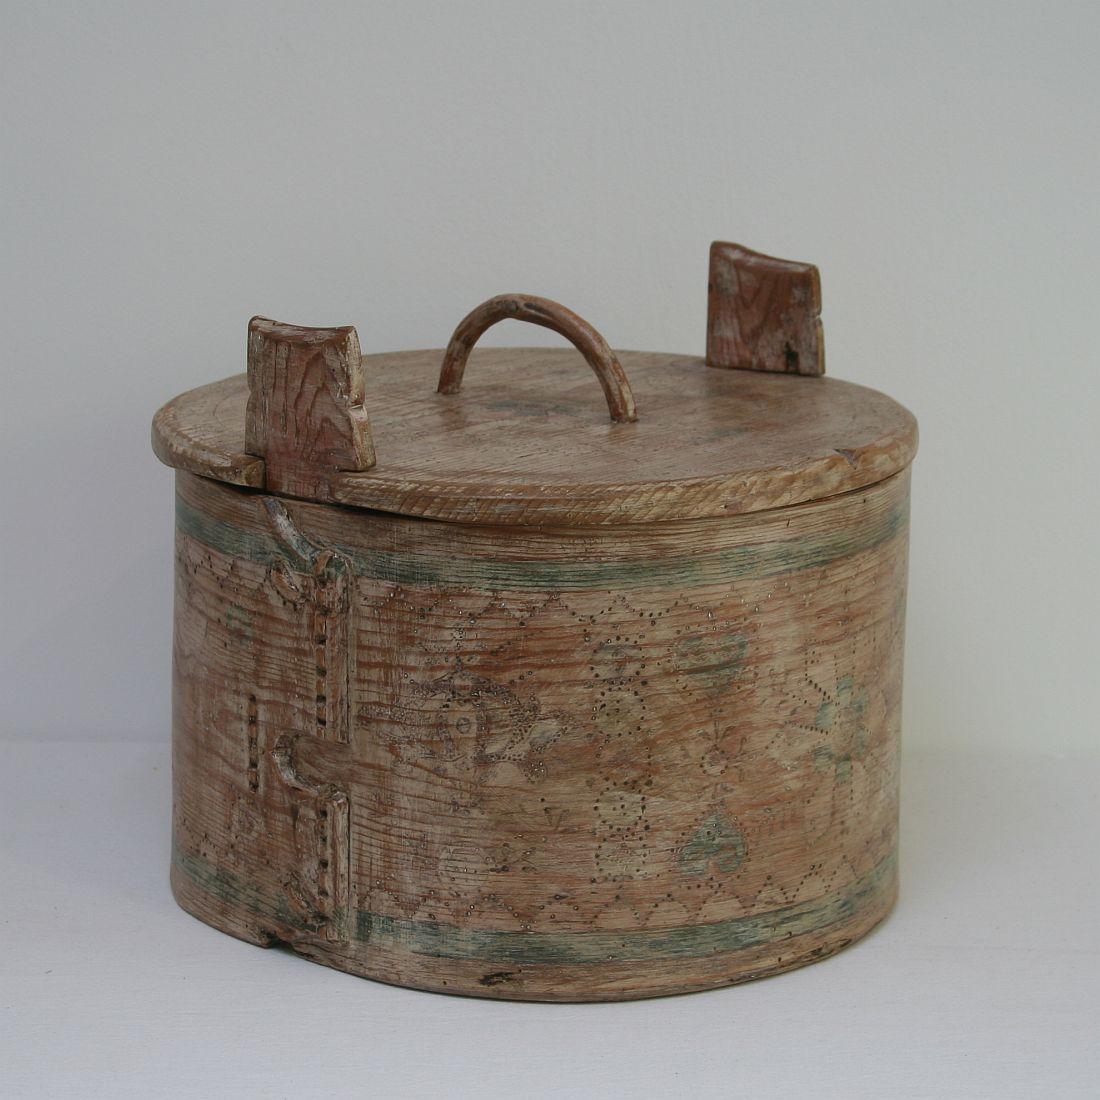 Rare Folk Art bentwood box with traces of its original colors, Sweden, 19th century. Weathered, small losses and old repairs.